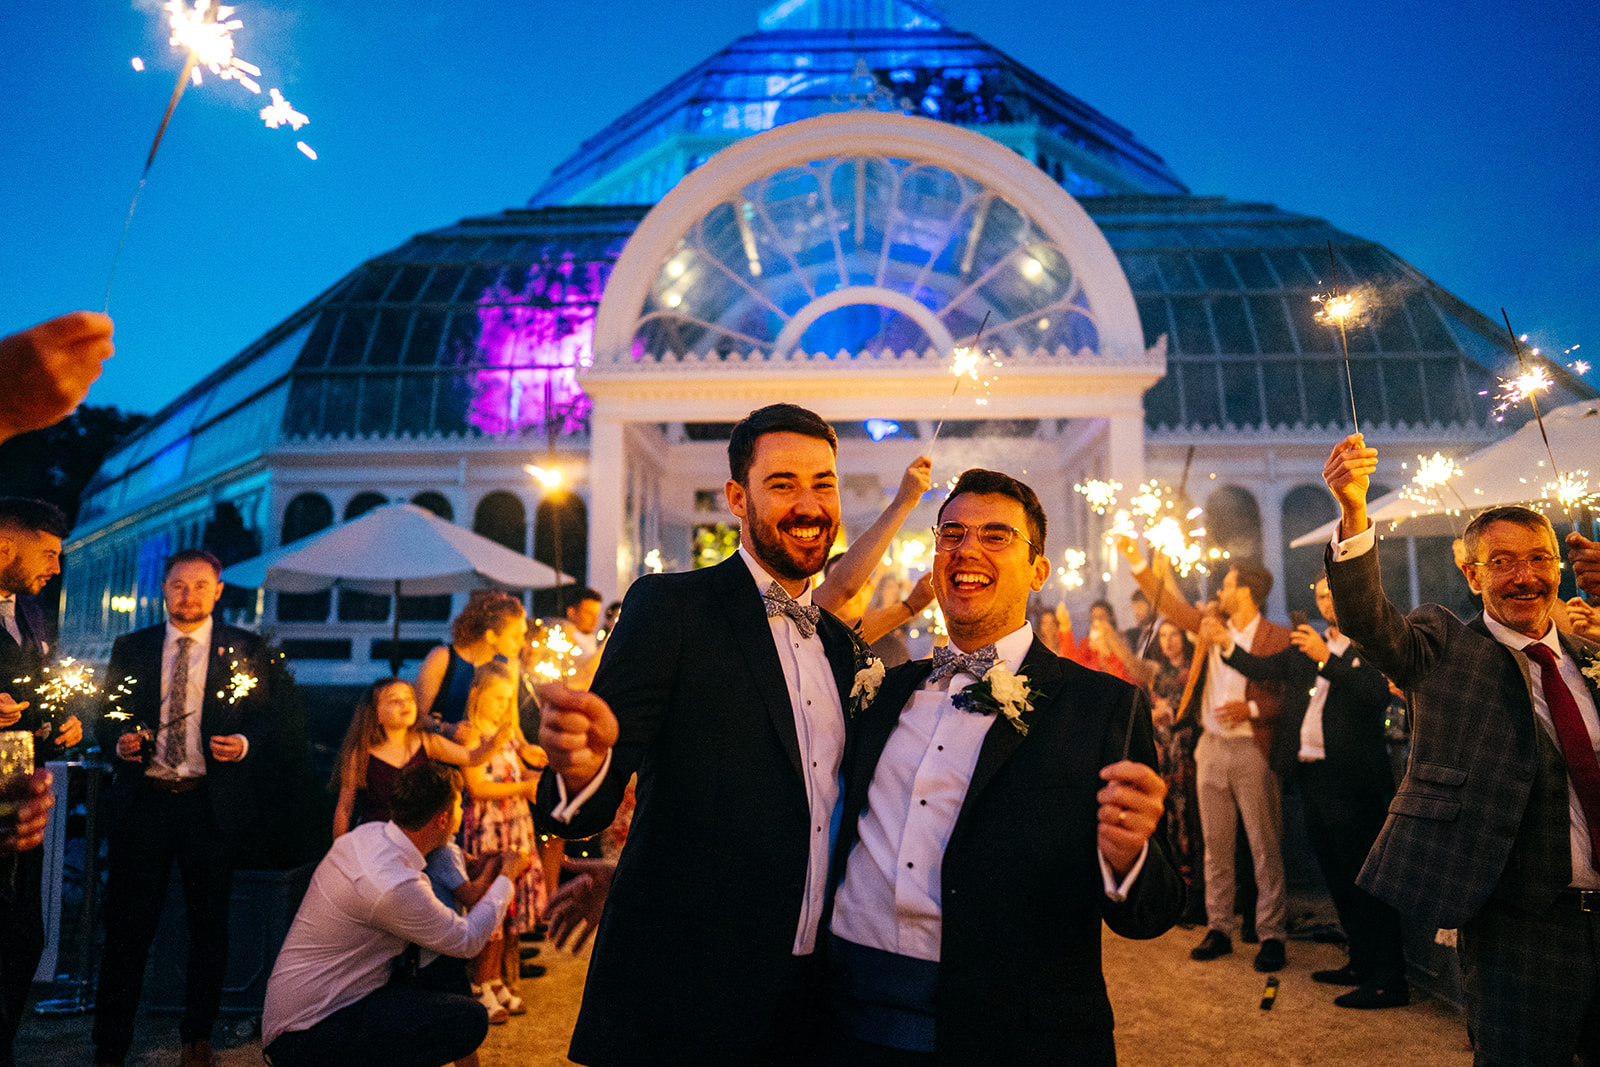 Sparkler exit at Sefton Park Palm House Wedding fro Phil and Pete in their tuxedos